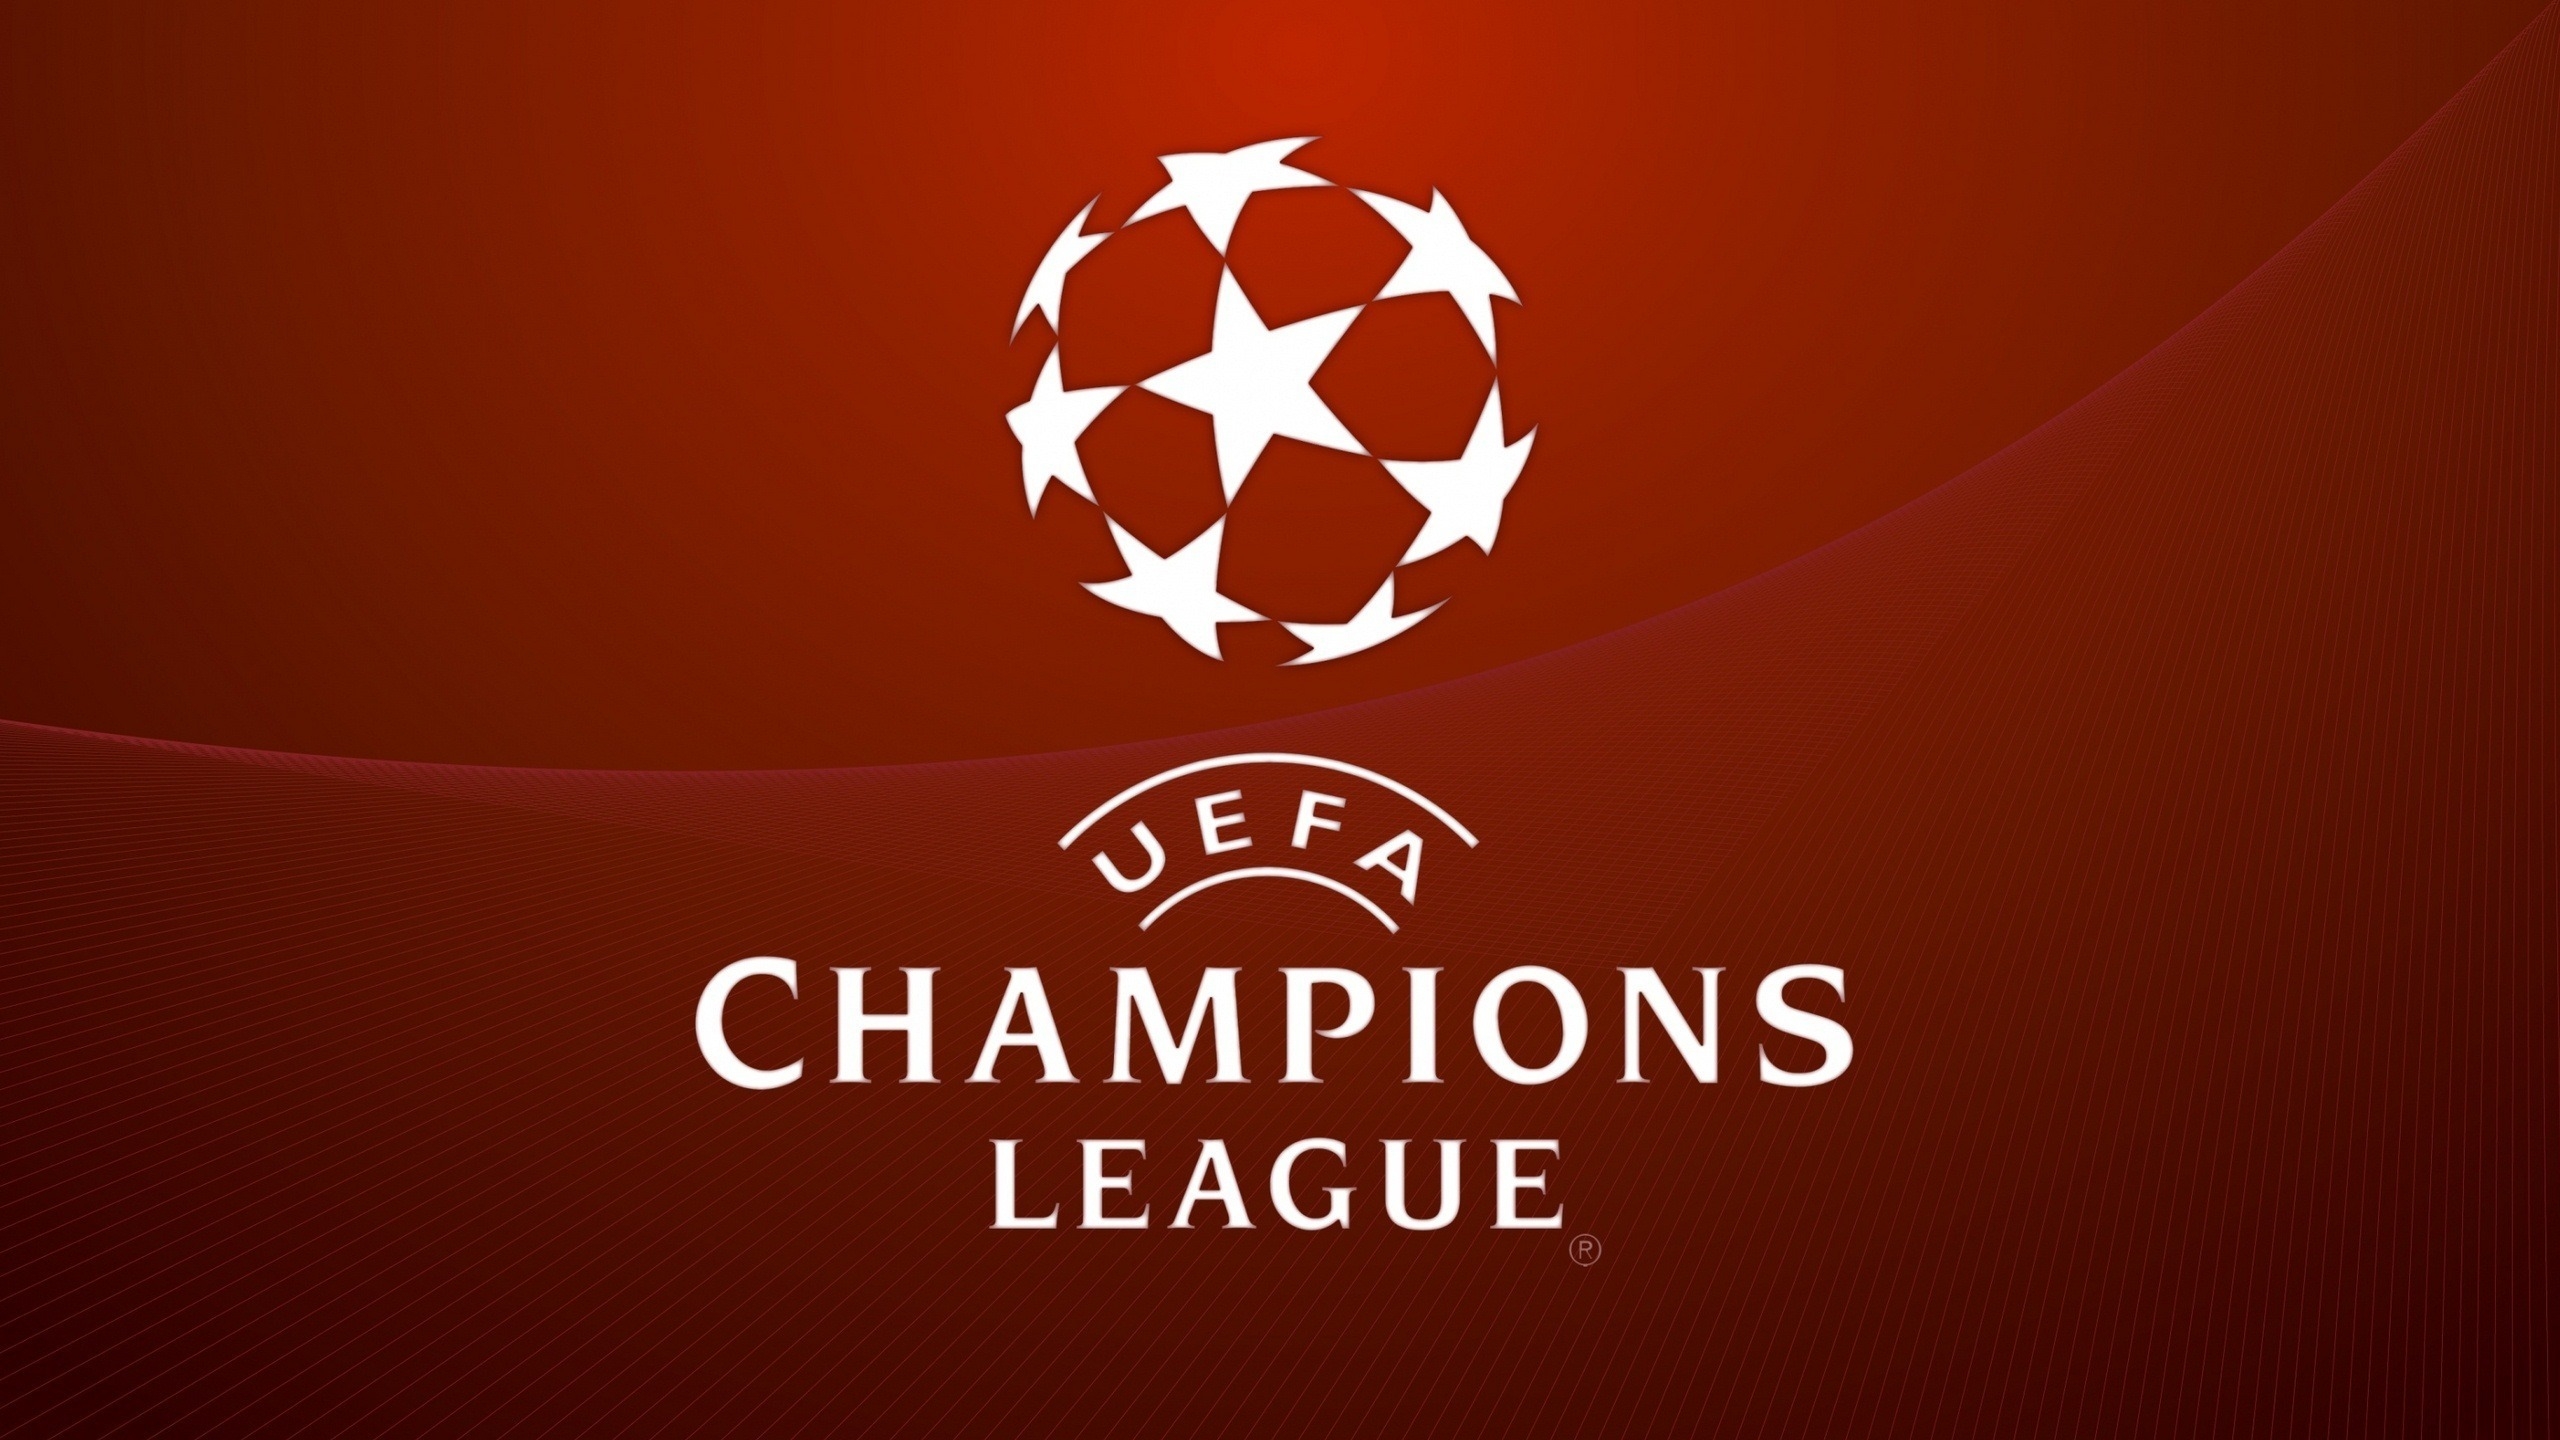 Champions League logo for 2560x1440 HDTV resolution